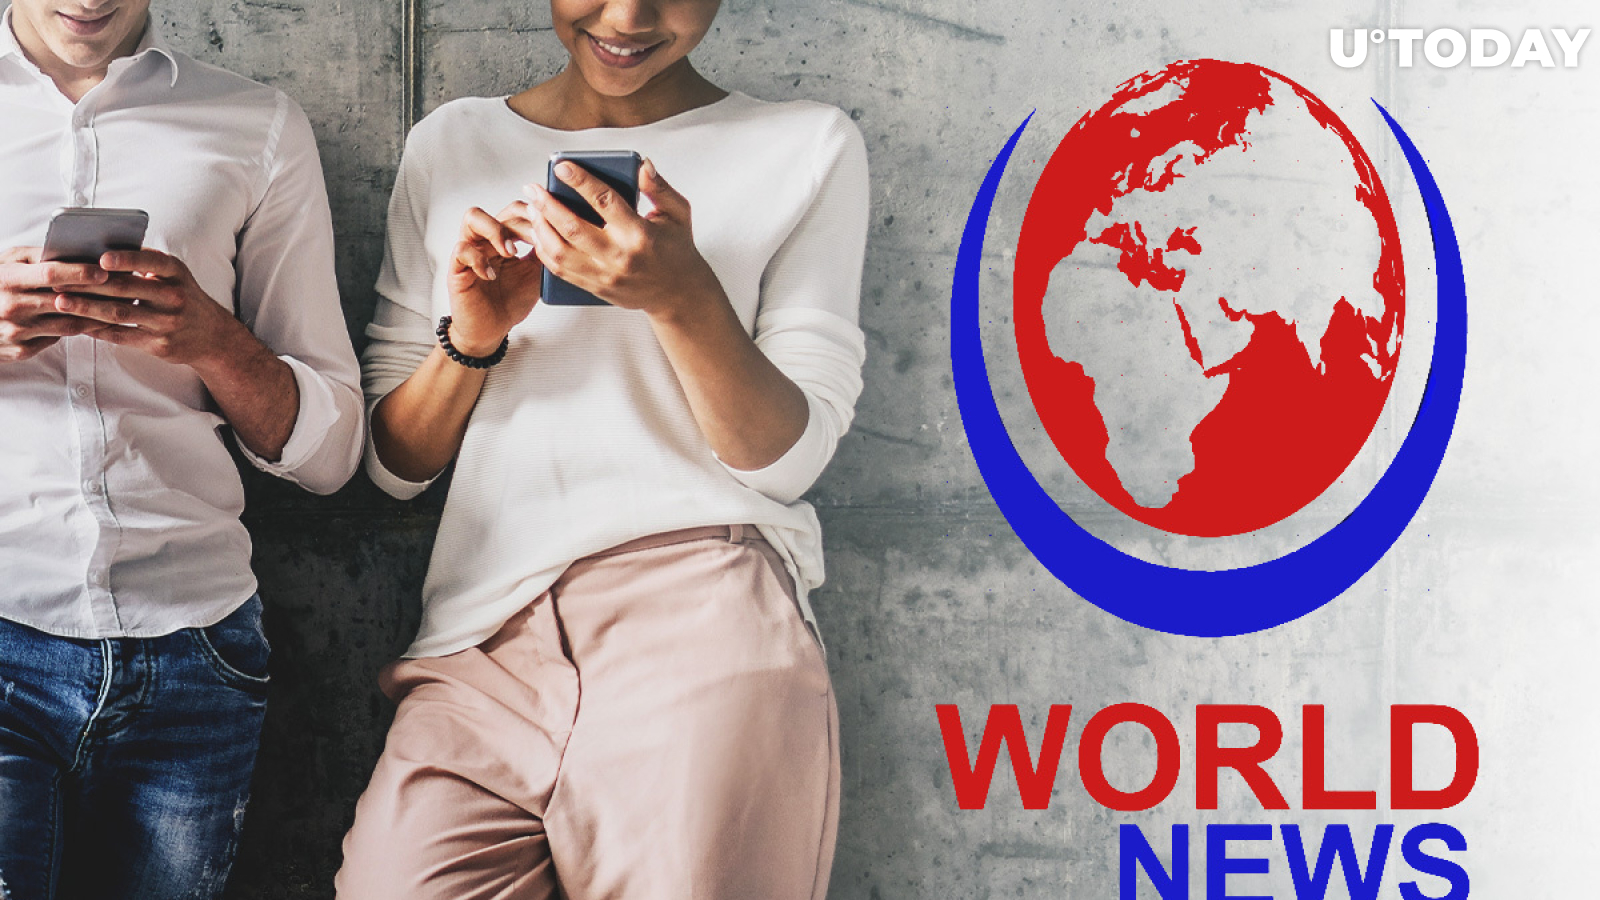 World News App Partners With U.Today To Boost Crypto and Blockchain News Section